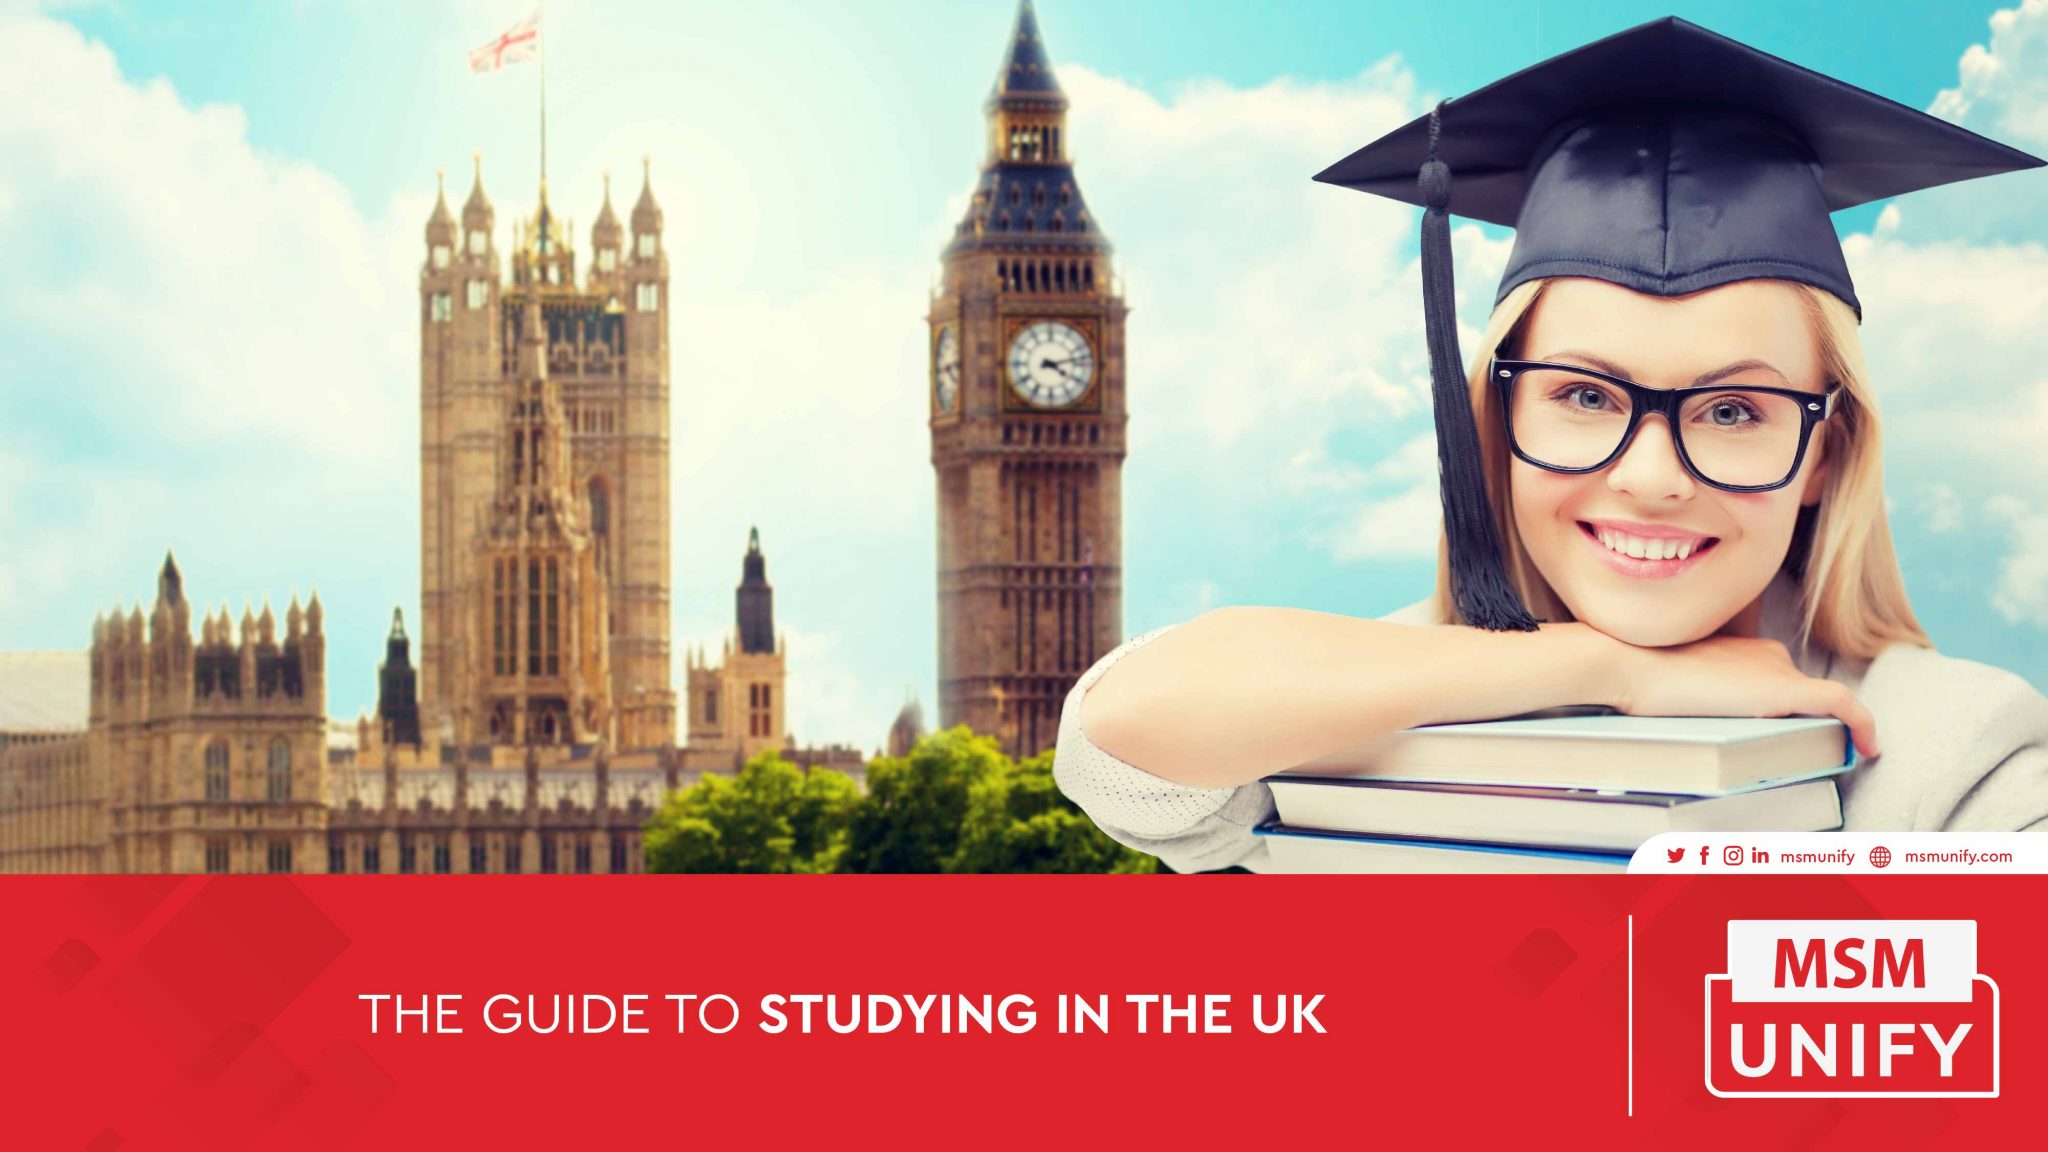  Discover the key to success with our ultimate guide on studying in the UK. Uncover insider tips and elevate your academic journey to new heights! Explore the opportunities to <a href="https://www.msmunify.com/blogs/studying-in-the-uk-the-ultimate-guide/">study abroad in the UK</a>.

